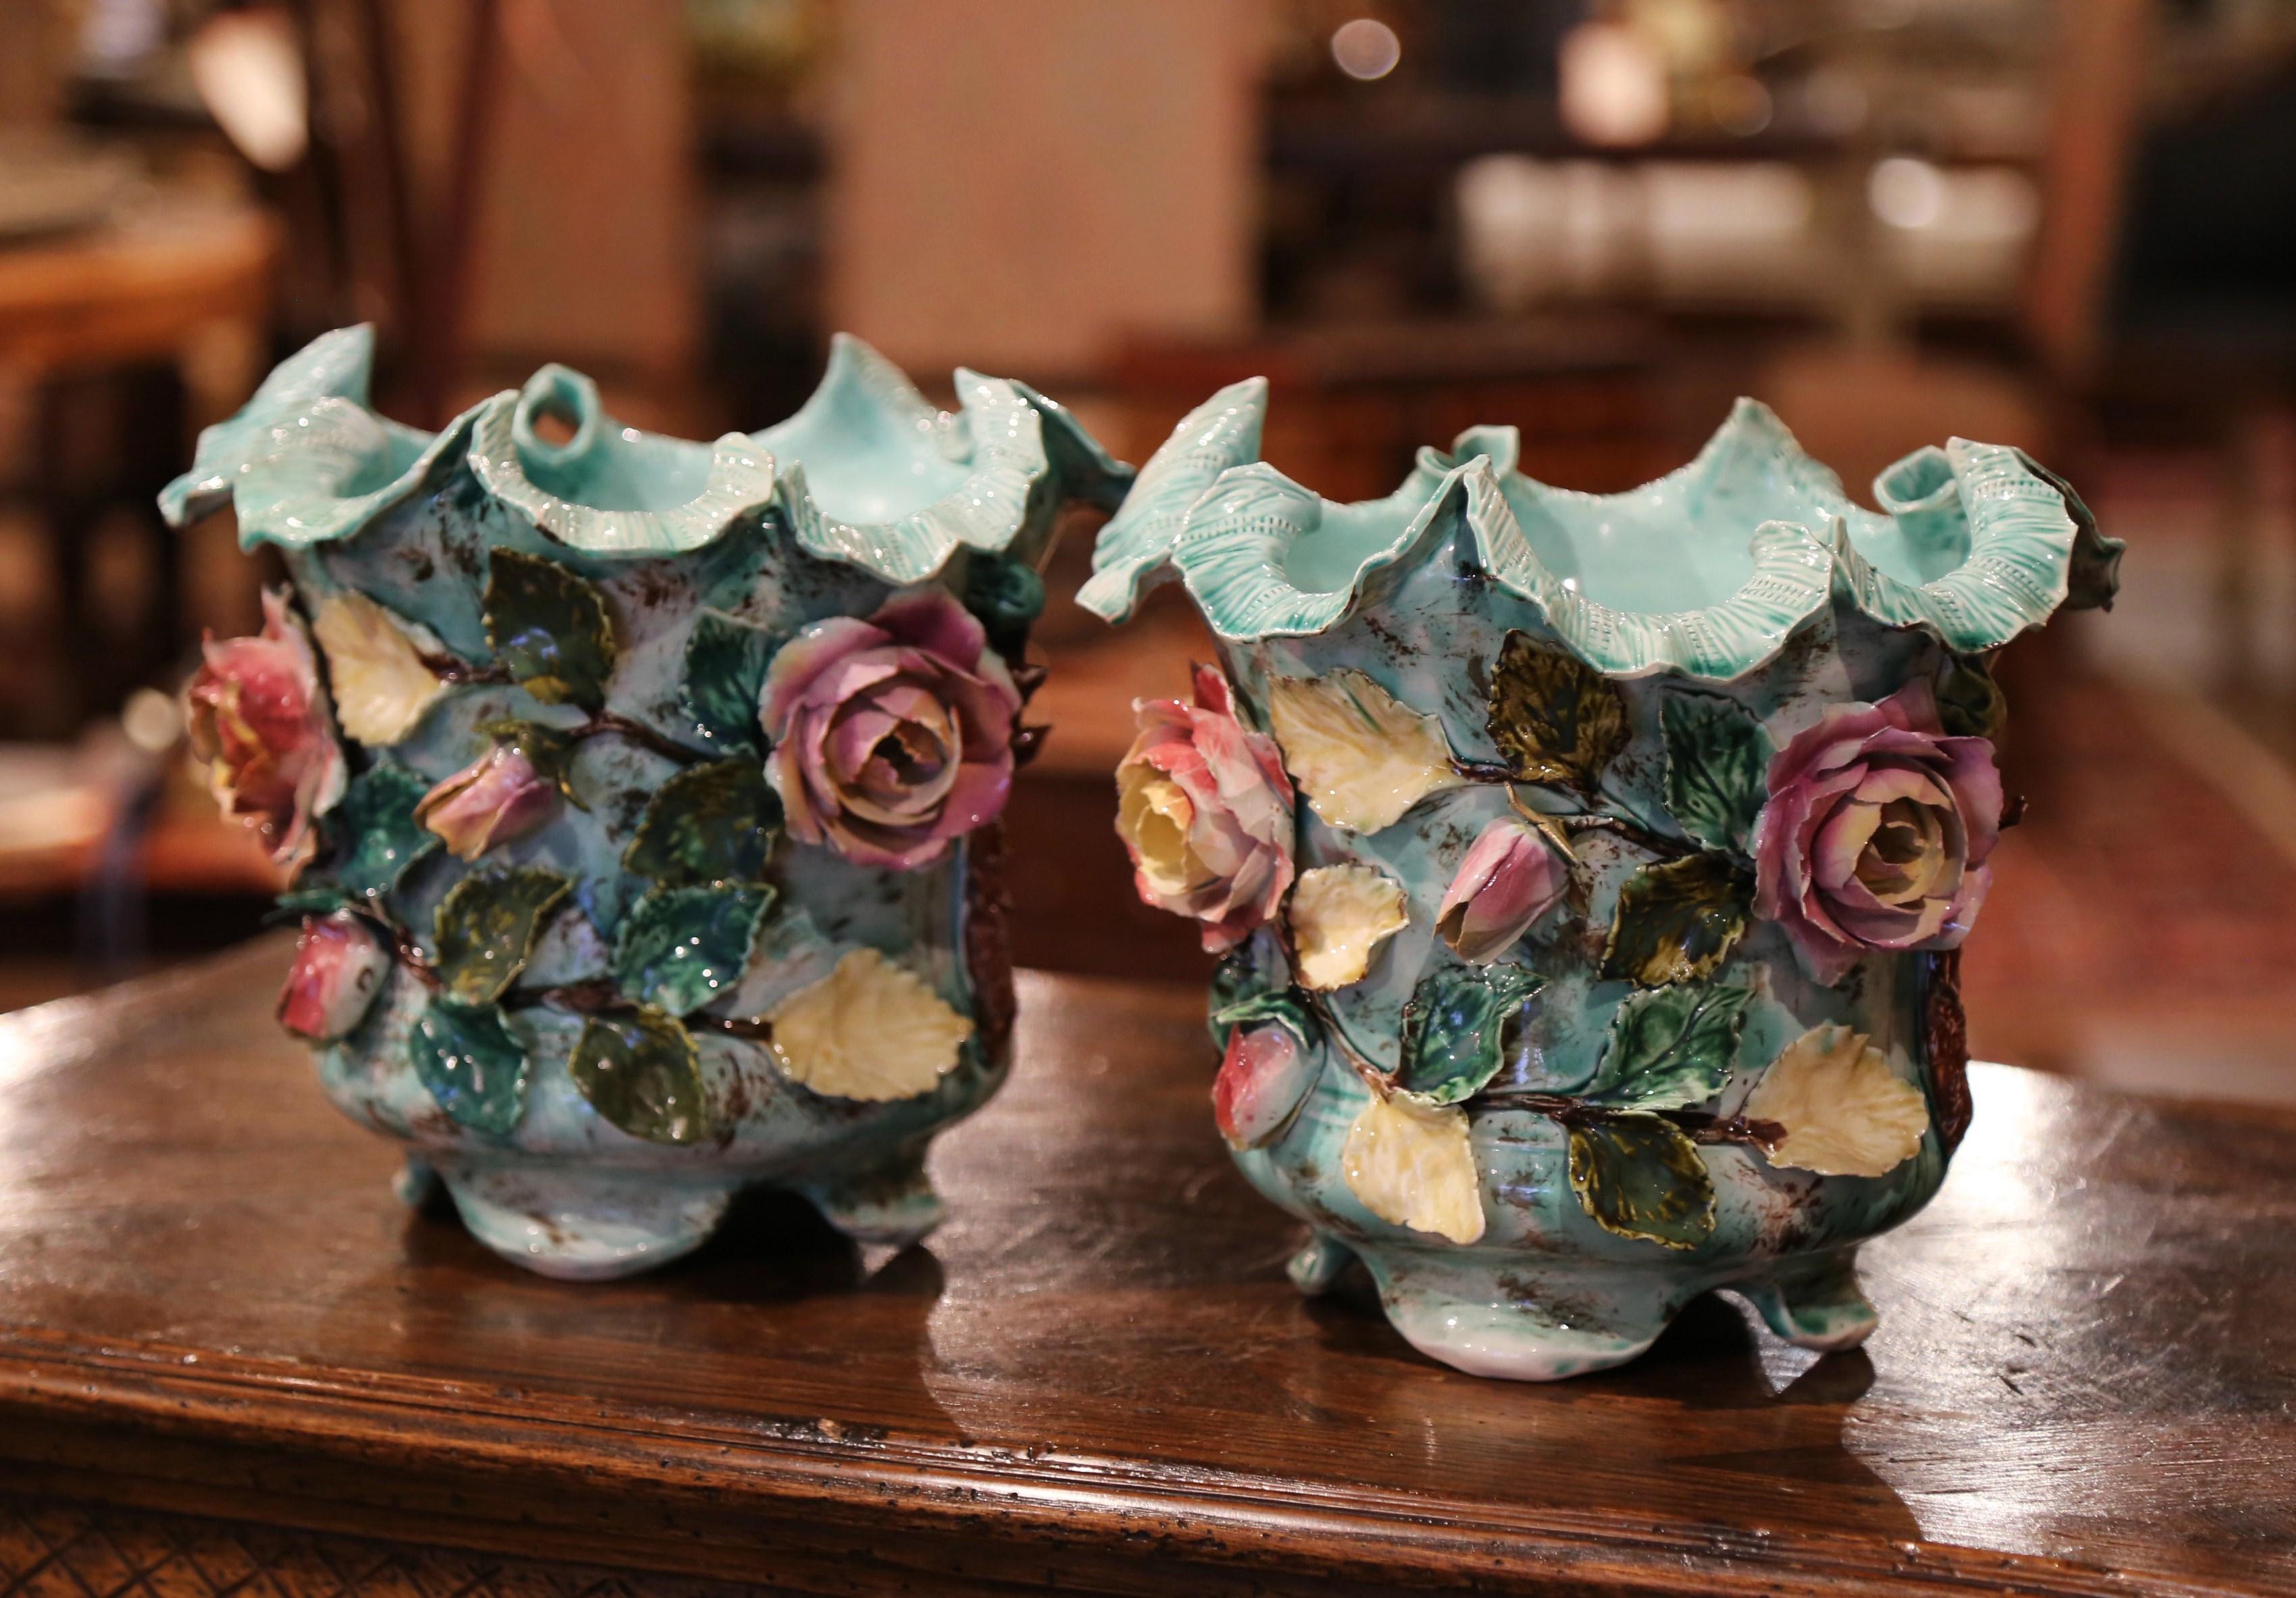 These unusual antique Majolica planters were crafted in France, circa 1870. Each decorative porcelain cache pot stands on four small scrolled feet and features colorful, high relief floral, green leaf and tree branch motifs. The colorful ceramic